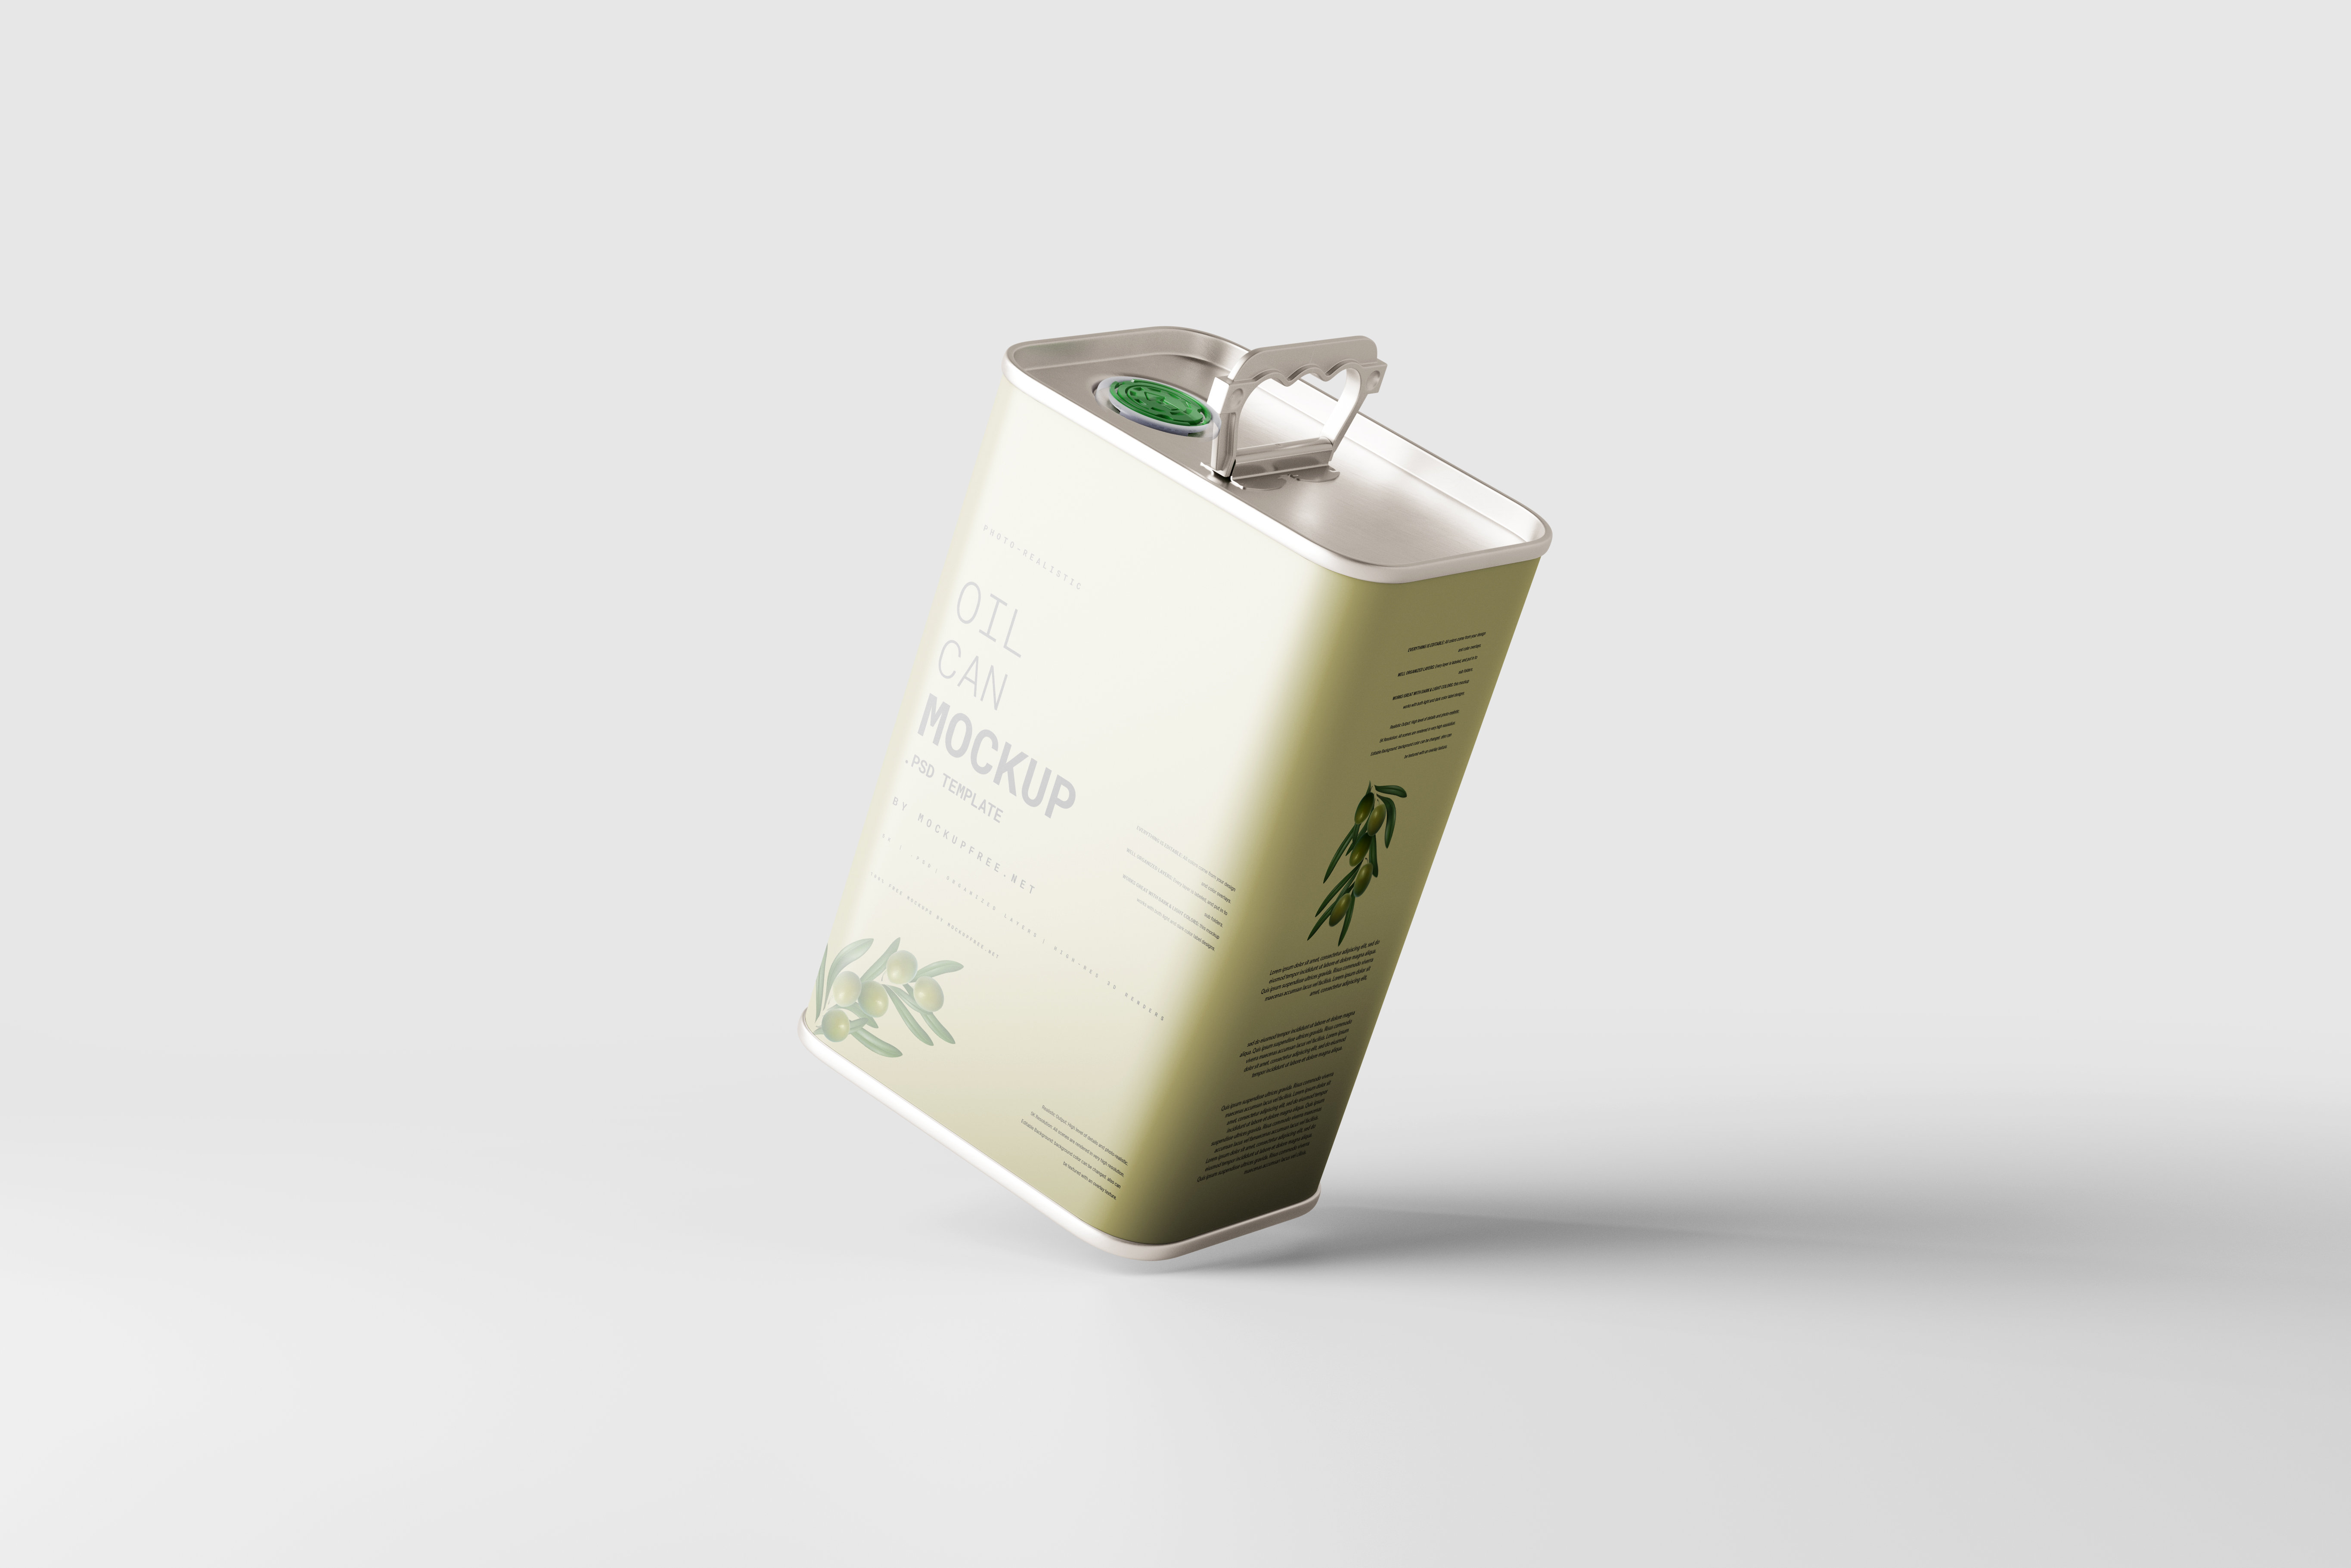 5 Rectangular Oil Can Mockups in Distinct Visions FREE PSD